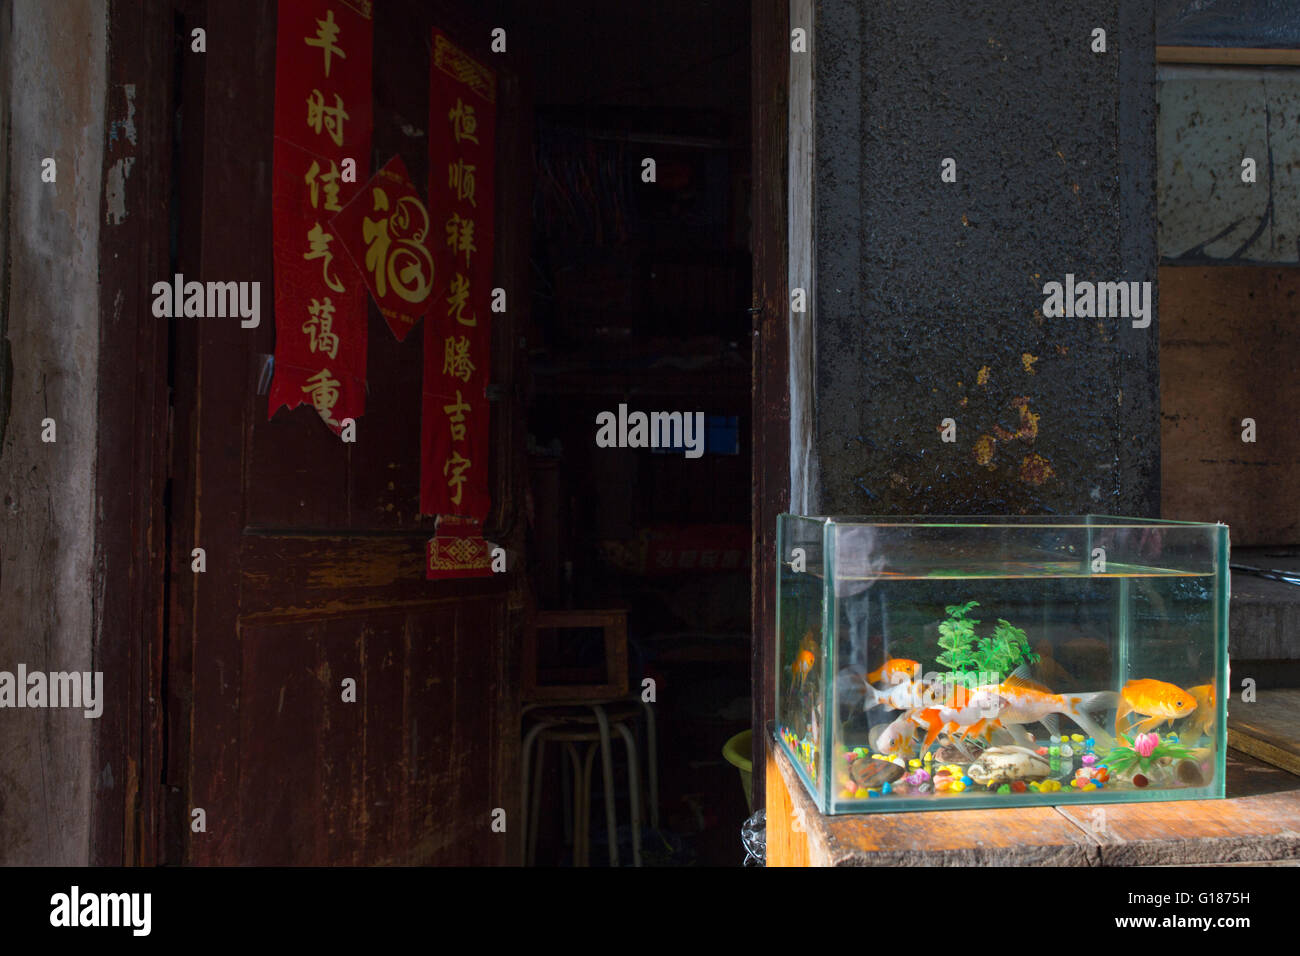 aquarium with goldfish outside in front of a door and a house in a street in Nanjing, China Stock Photo